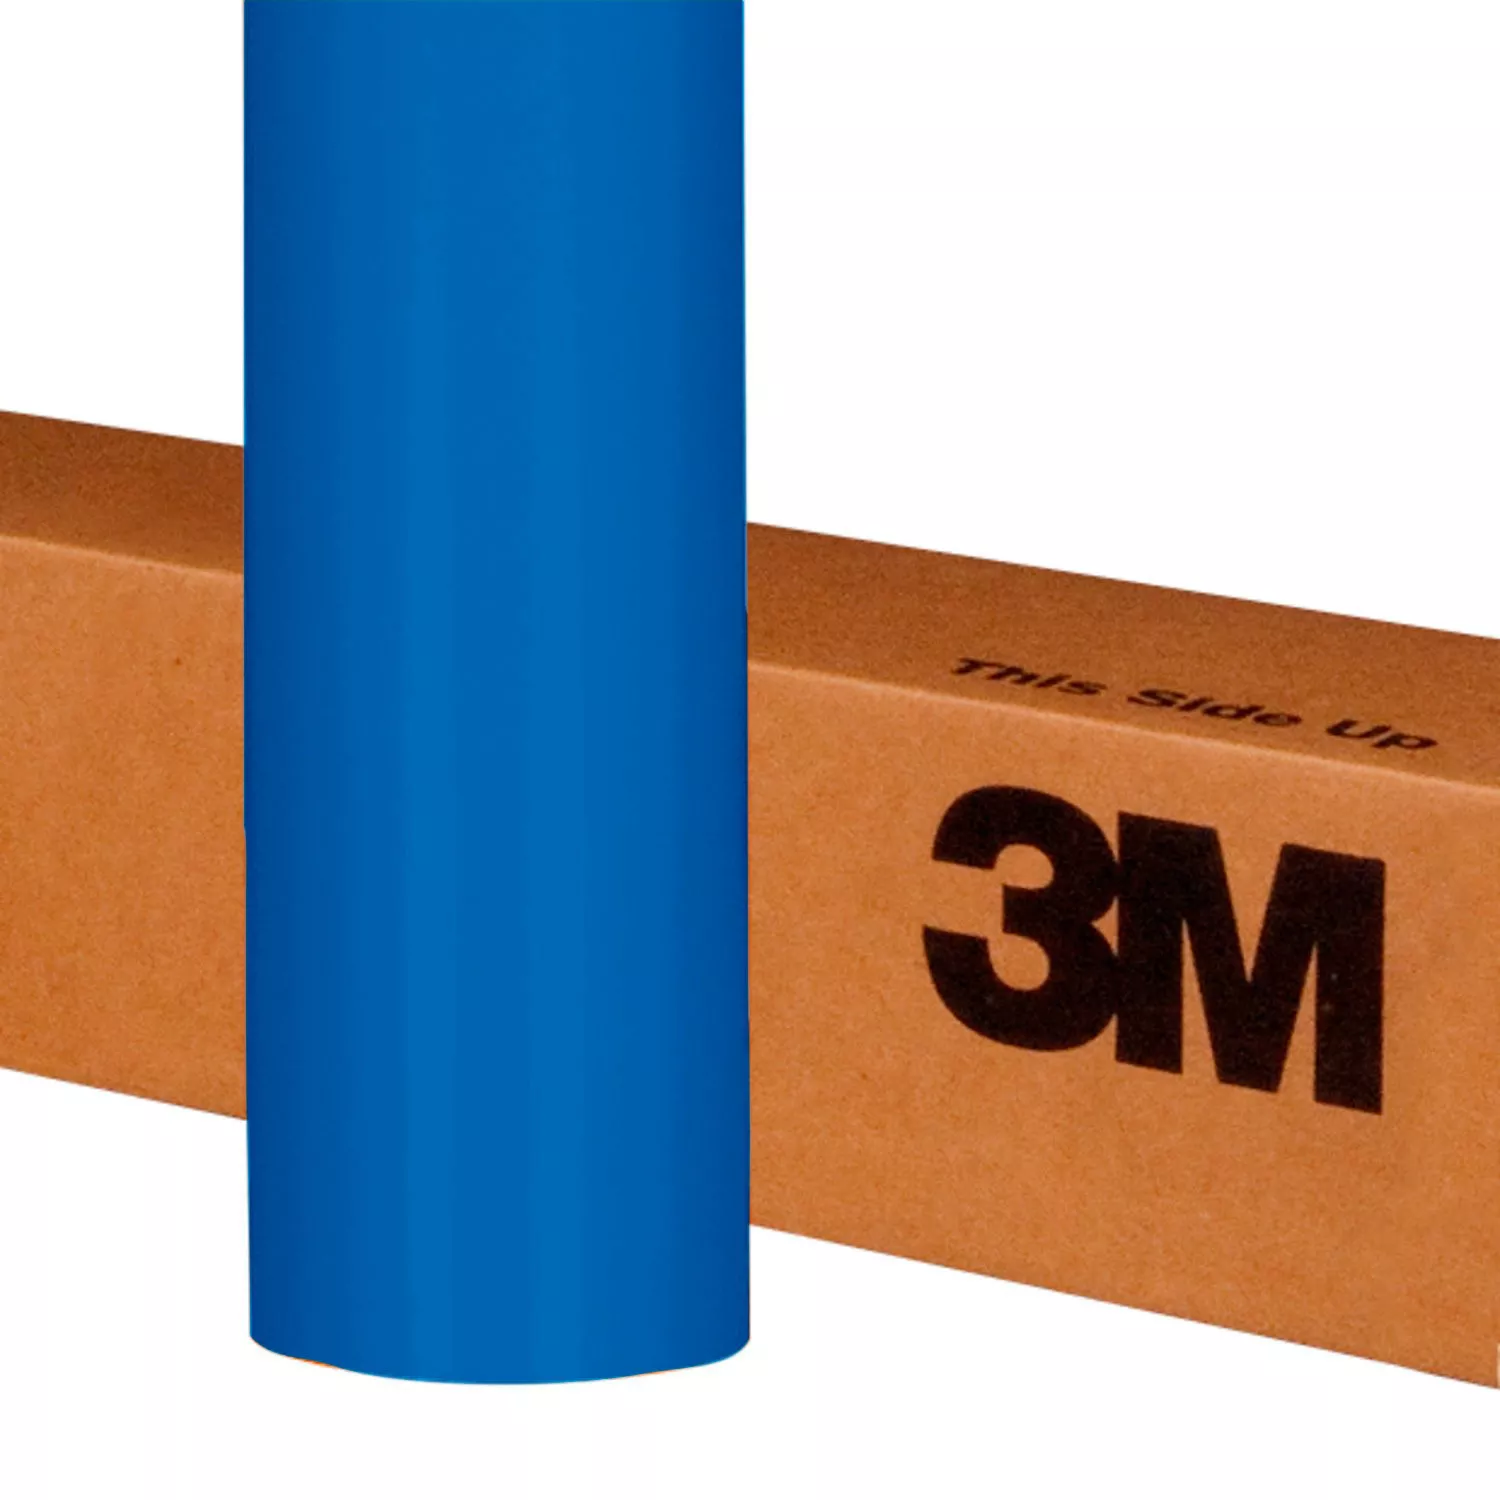 3M™ Scotchcal™ ElectroCut™ Graphic Film 7725-117, Persian Blue, 48 in x
50 yd